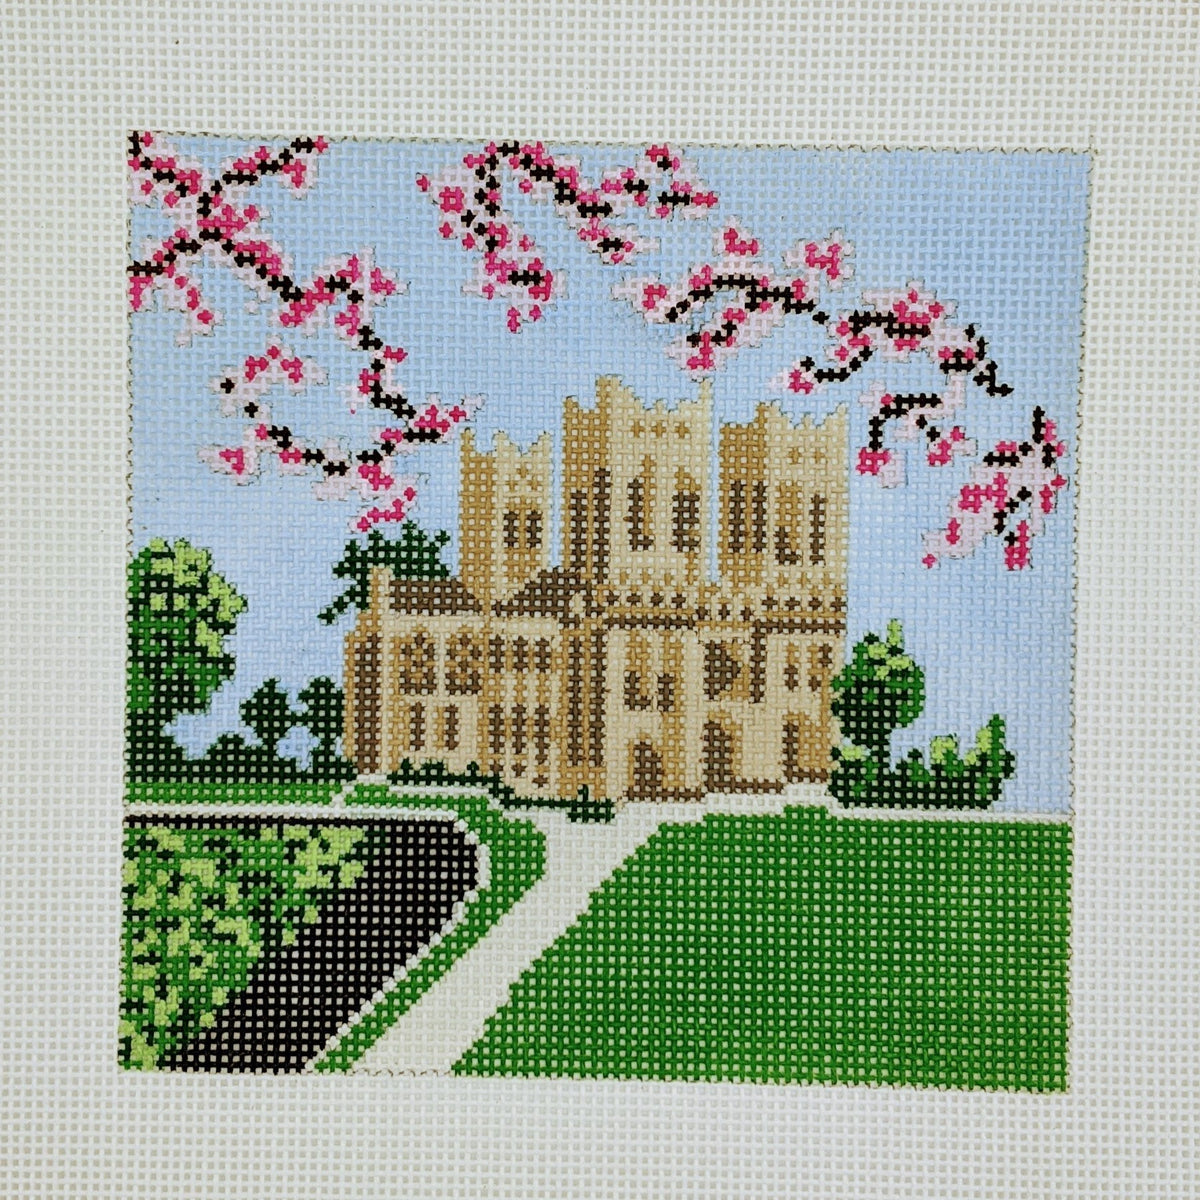 National Cathedral with Cherry Blossoms Pillow